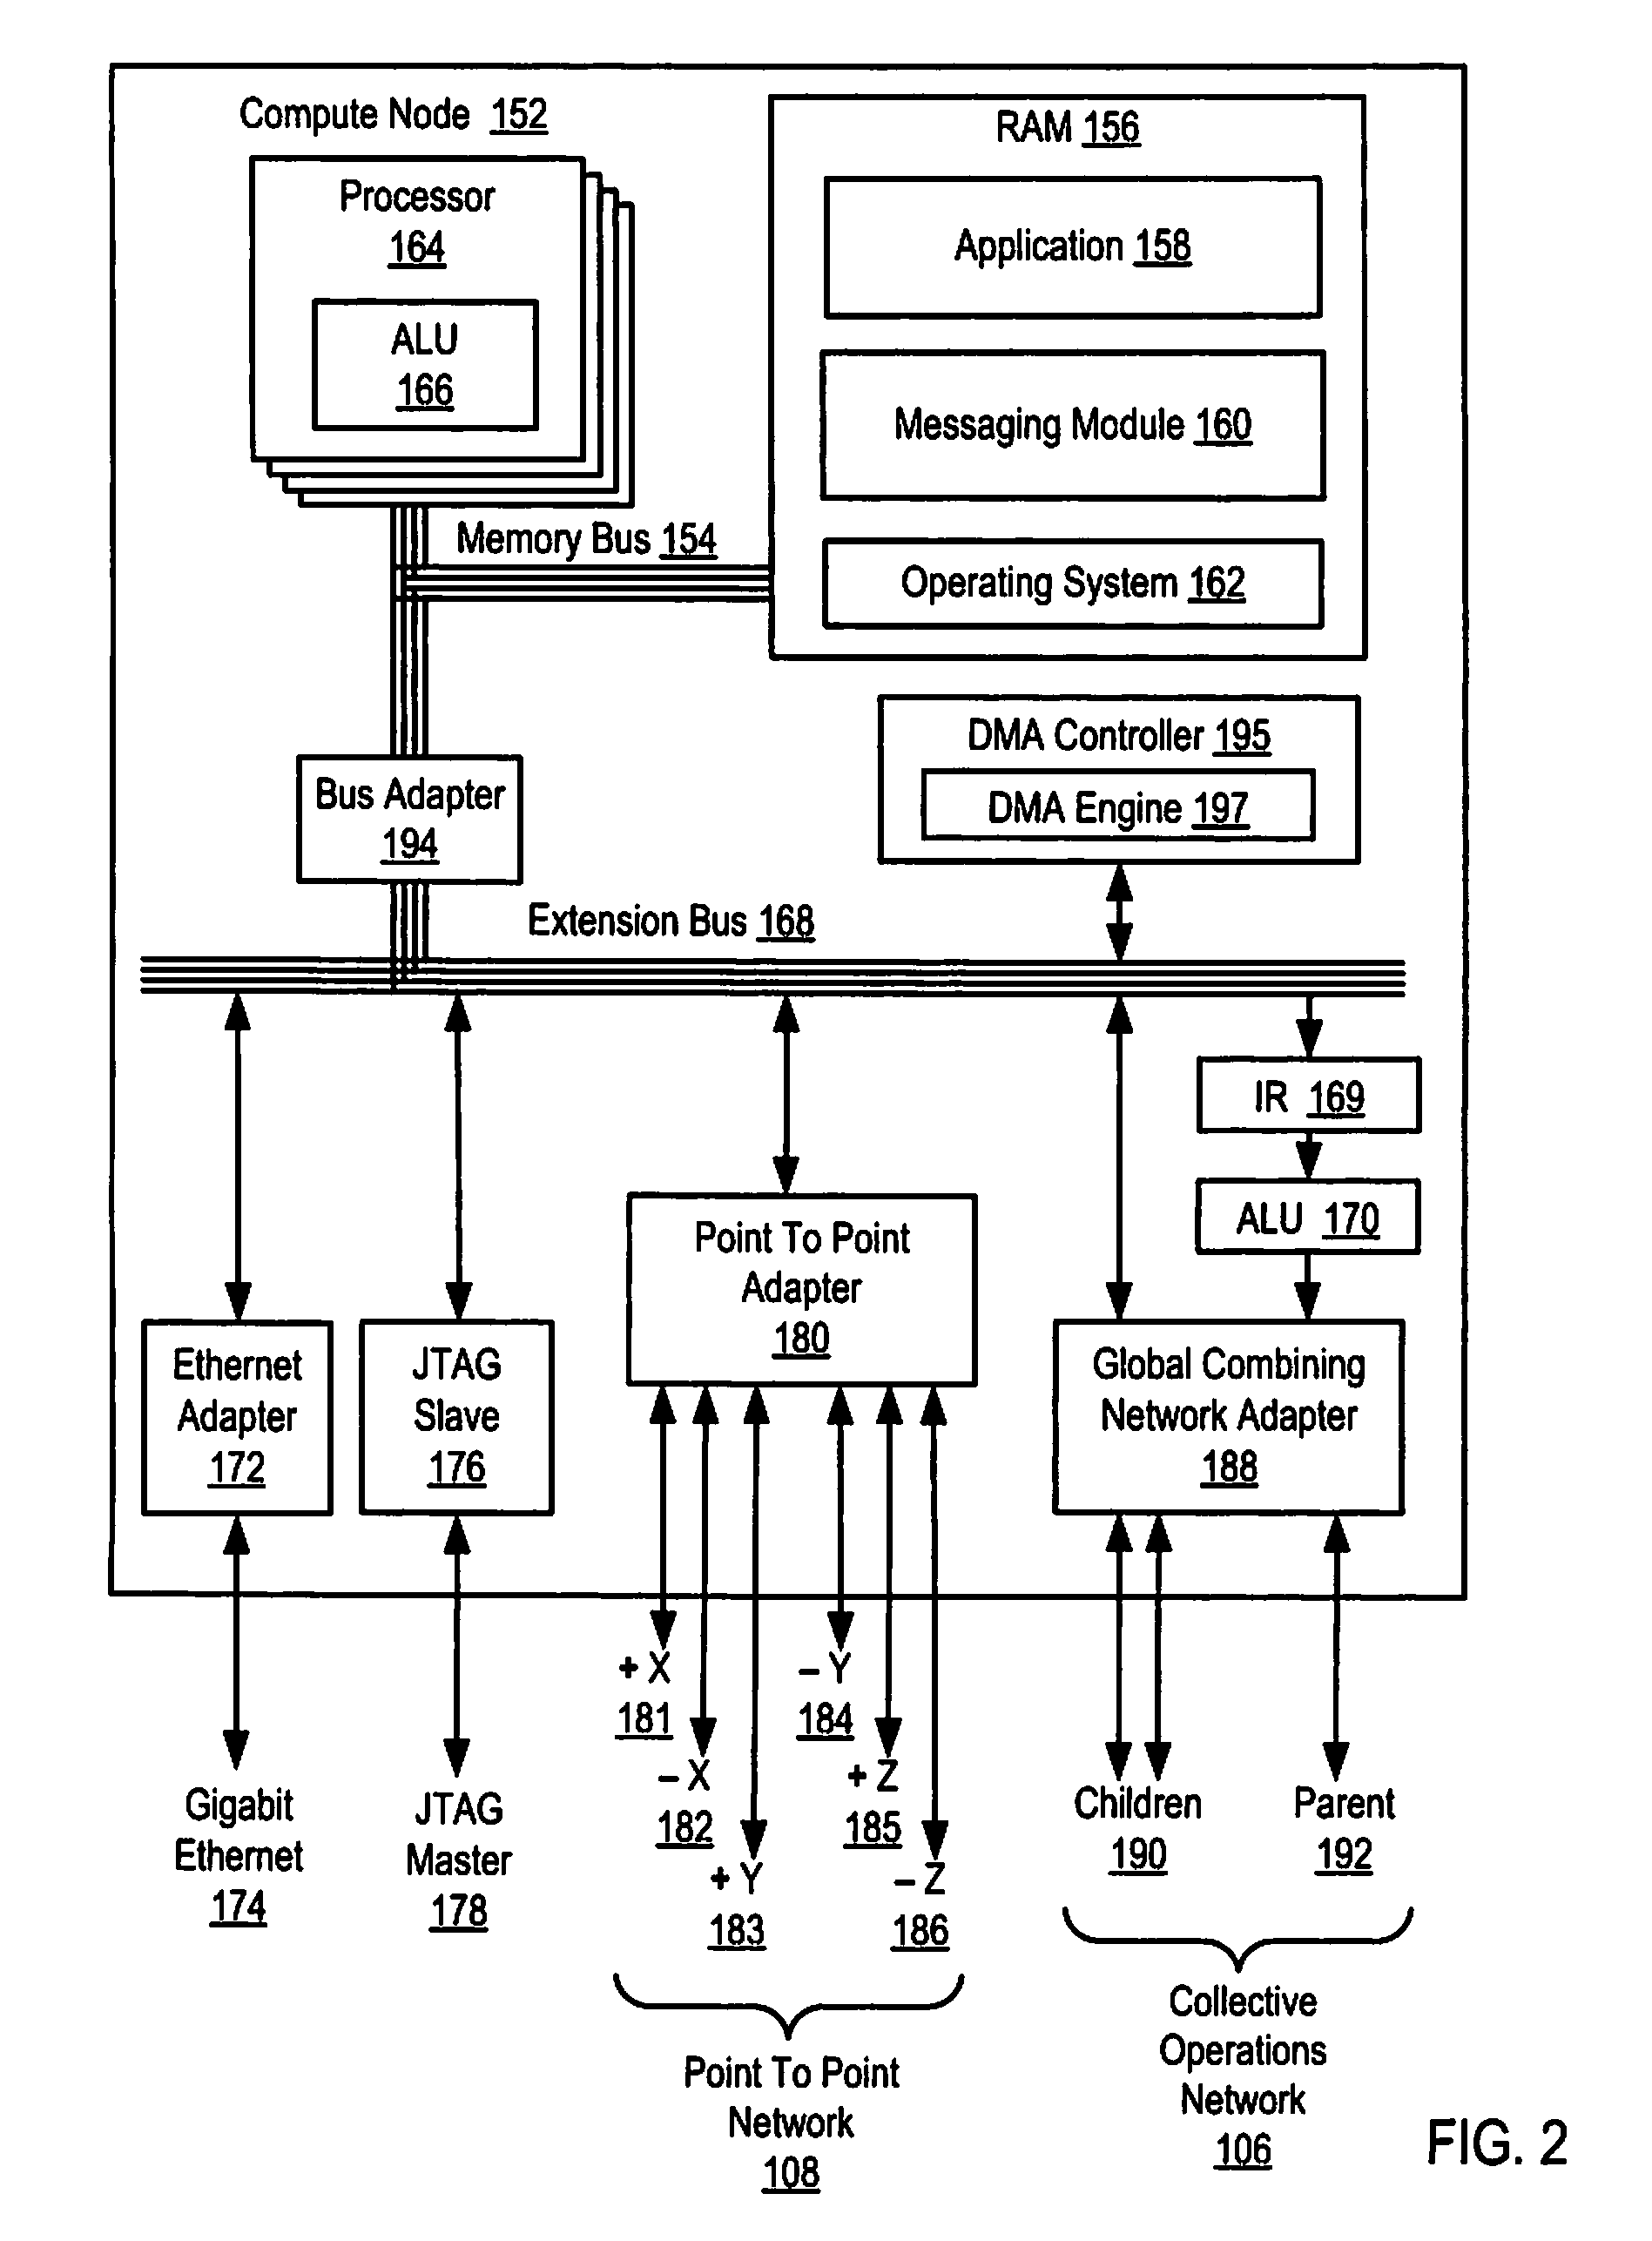 Message communications of particular message types between compute nodes using DMA shadow buffers